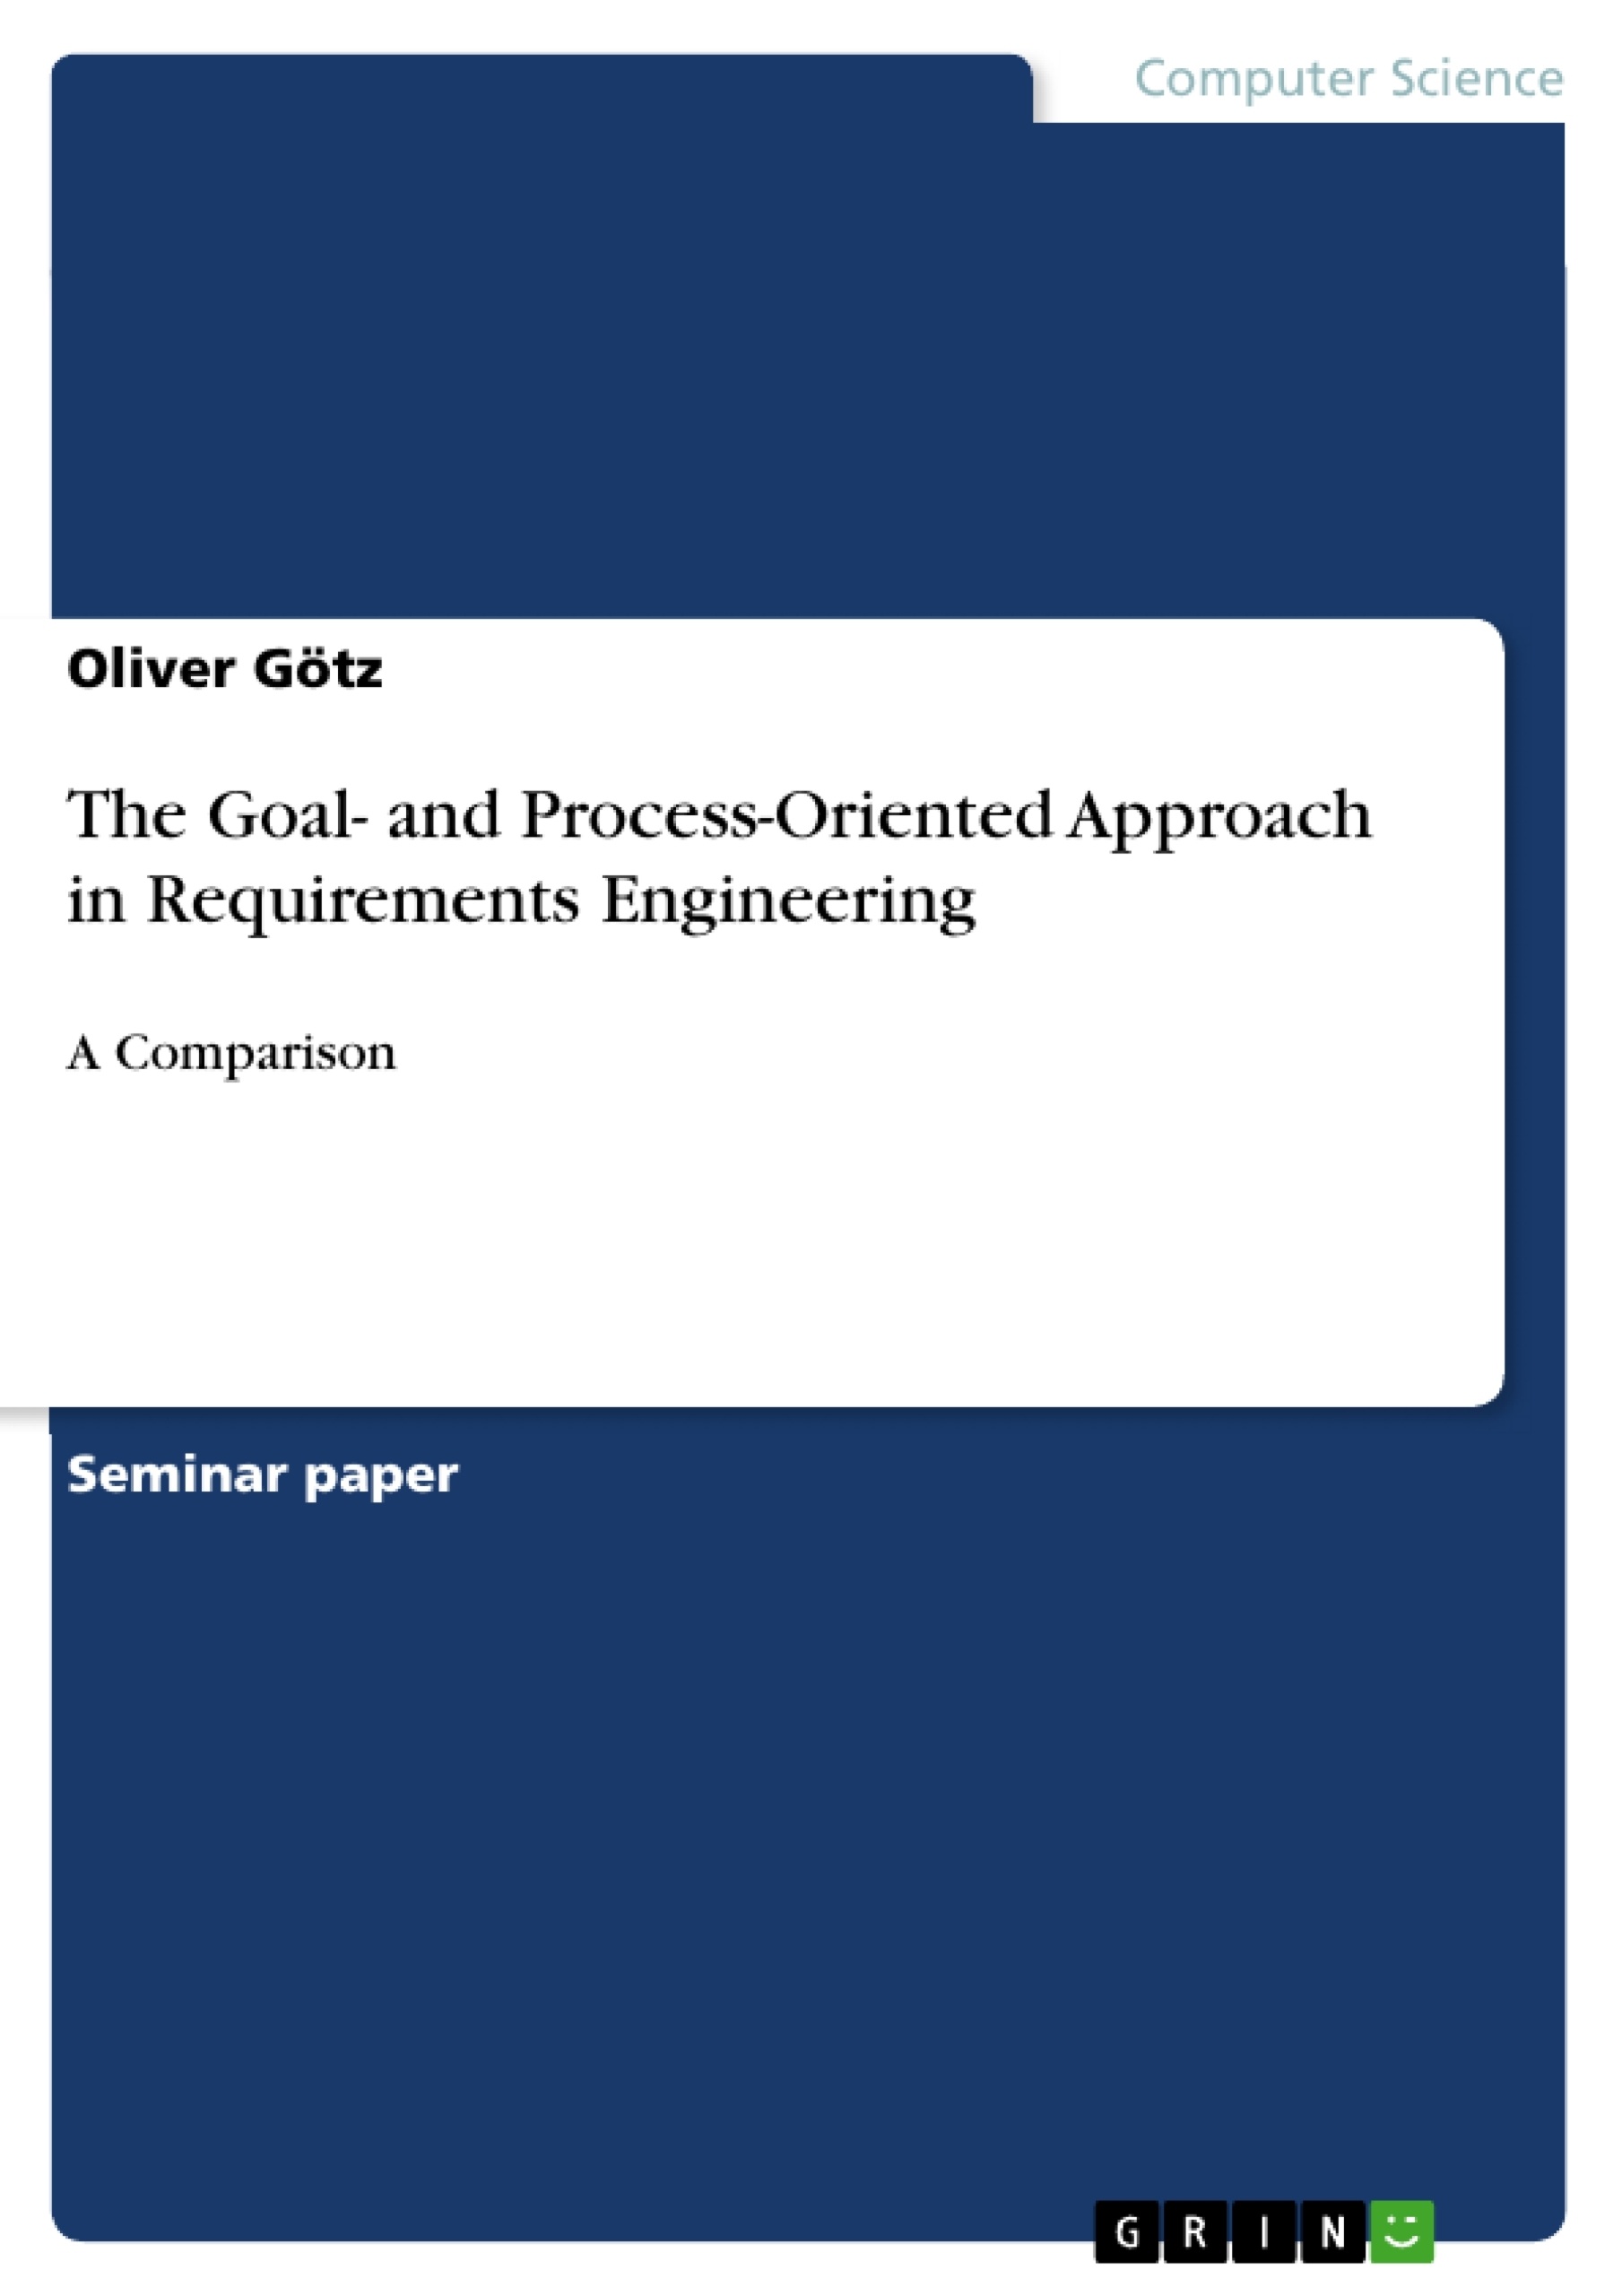 Título: The Goal- and Process-Oriented Approach in Requirements Engineering